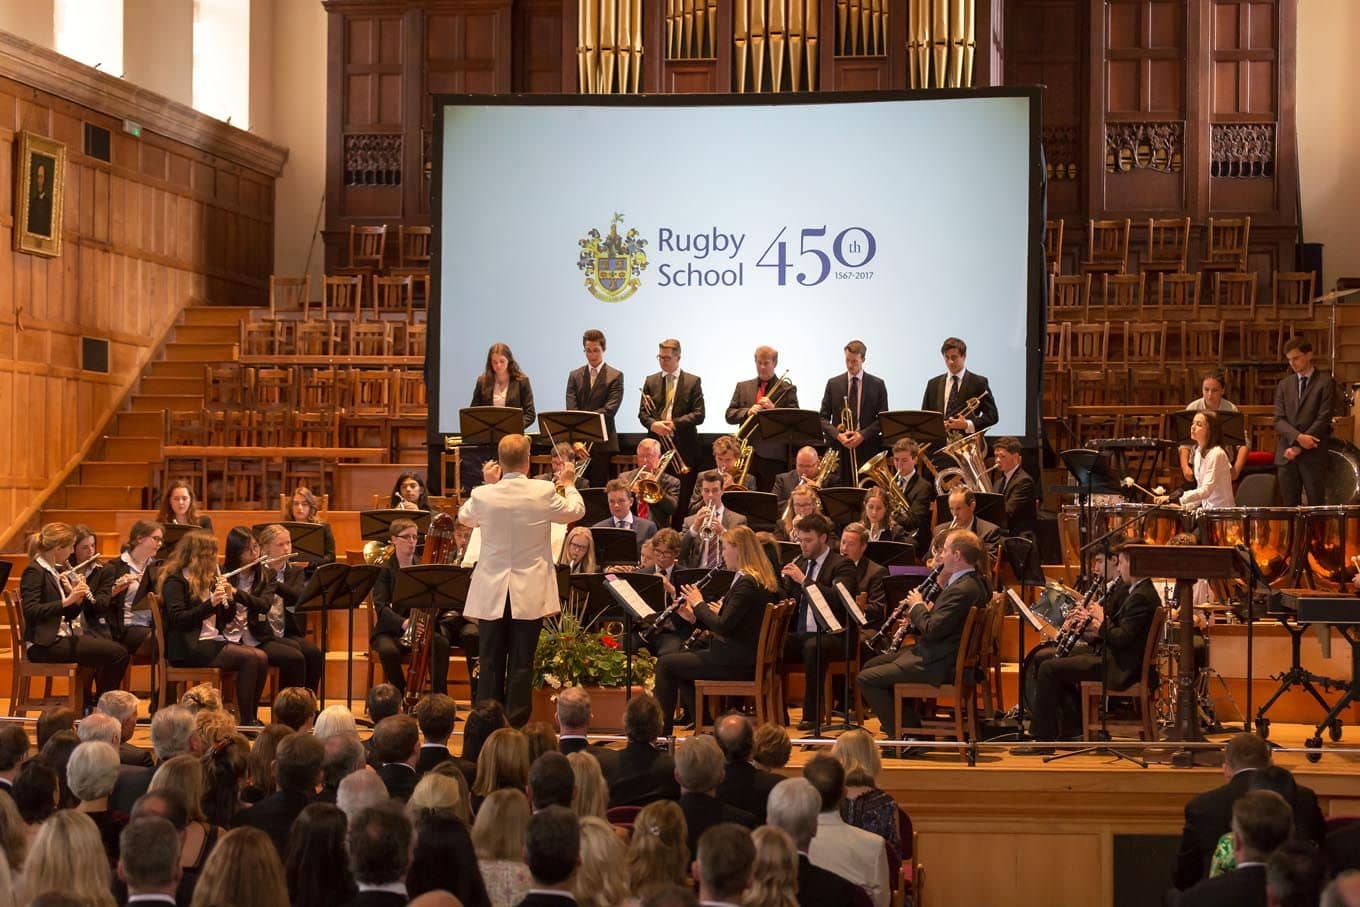 Rugby School 450th Anniversary Celebrations